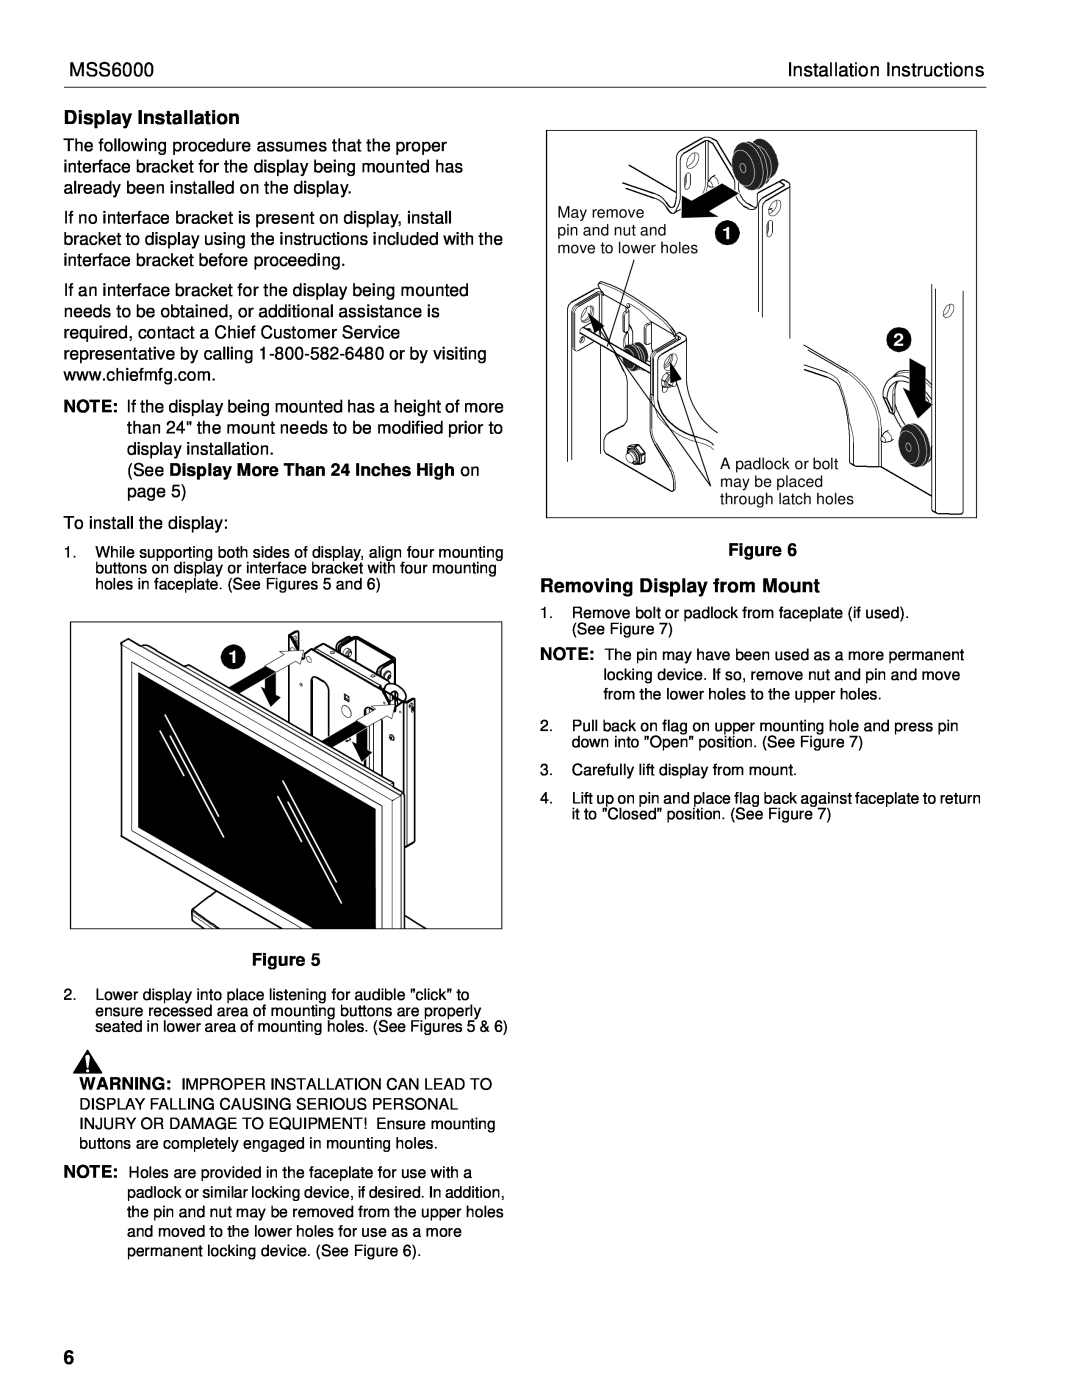 Chief Manufacturing MSS6000 Display Installation, Removing Display from Mount, Installation Instructions 